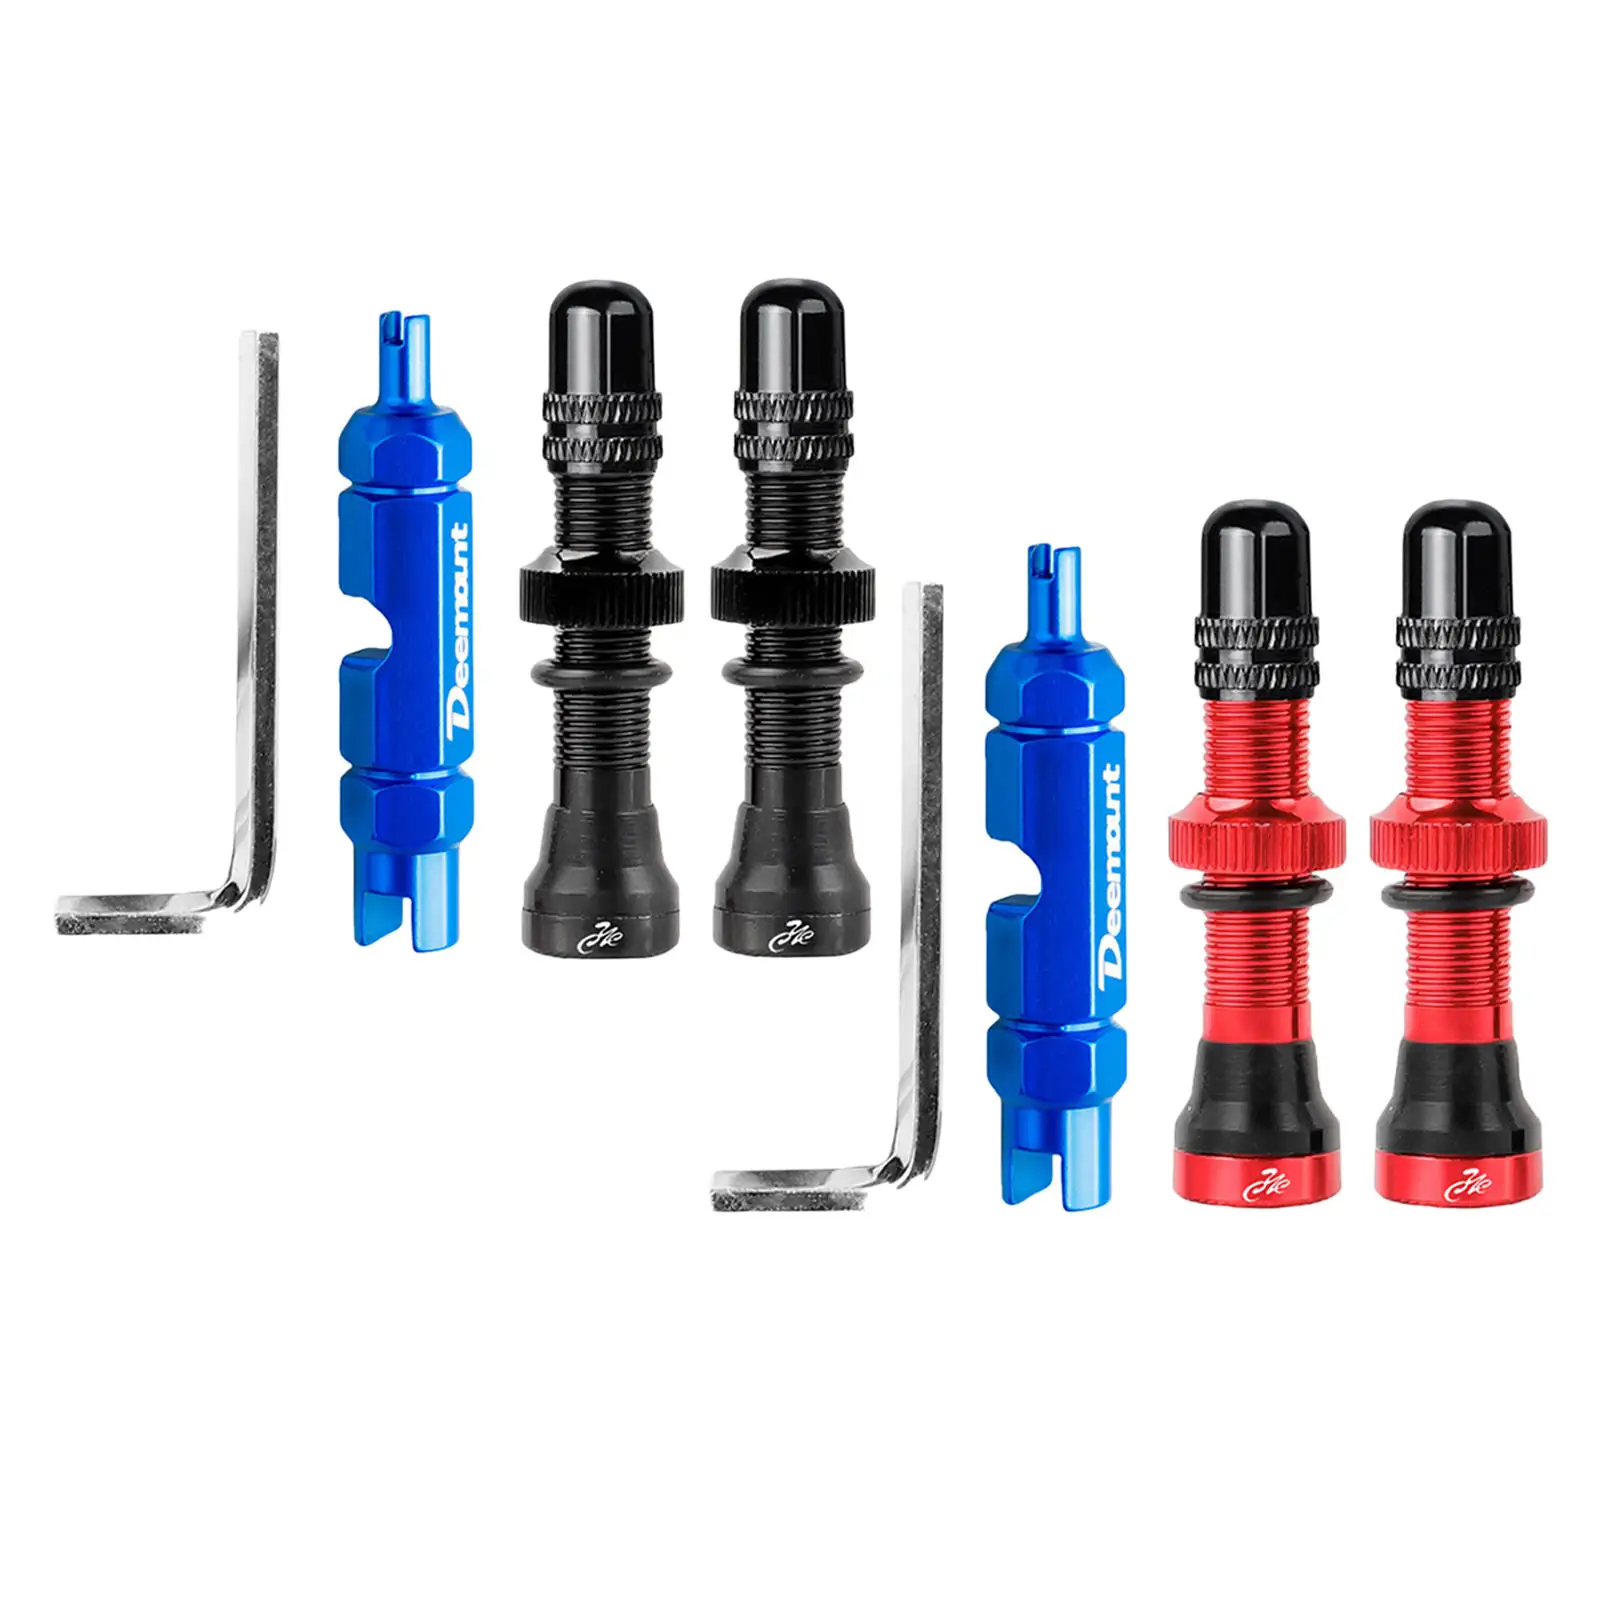 Bike Valve Brass Core and Removal Tool CNC-Machined MTB Road Mountain Bike Tubes Repair Tire Parts Repair Accessory